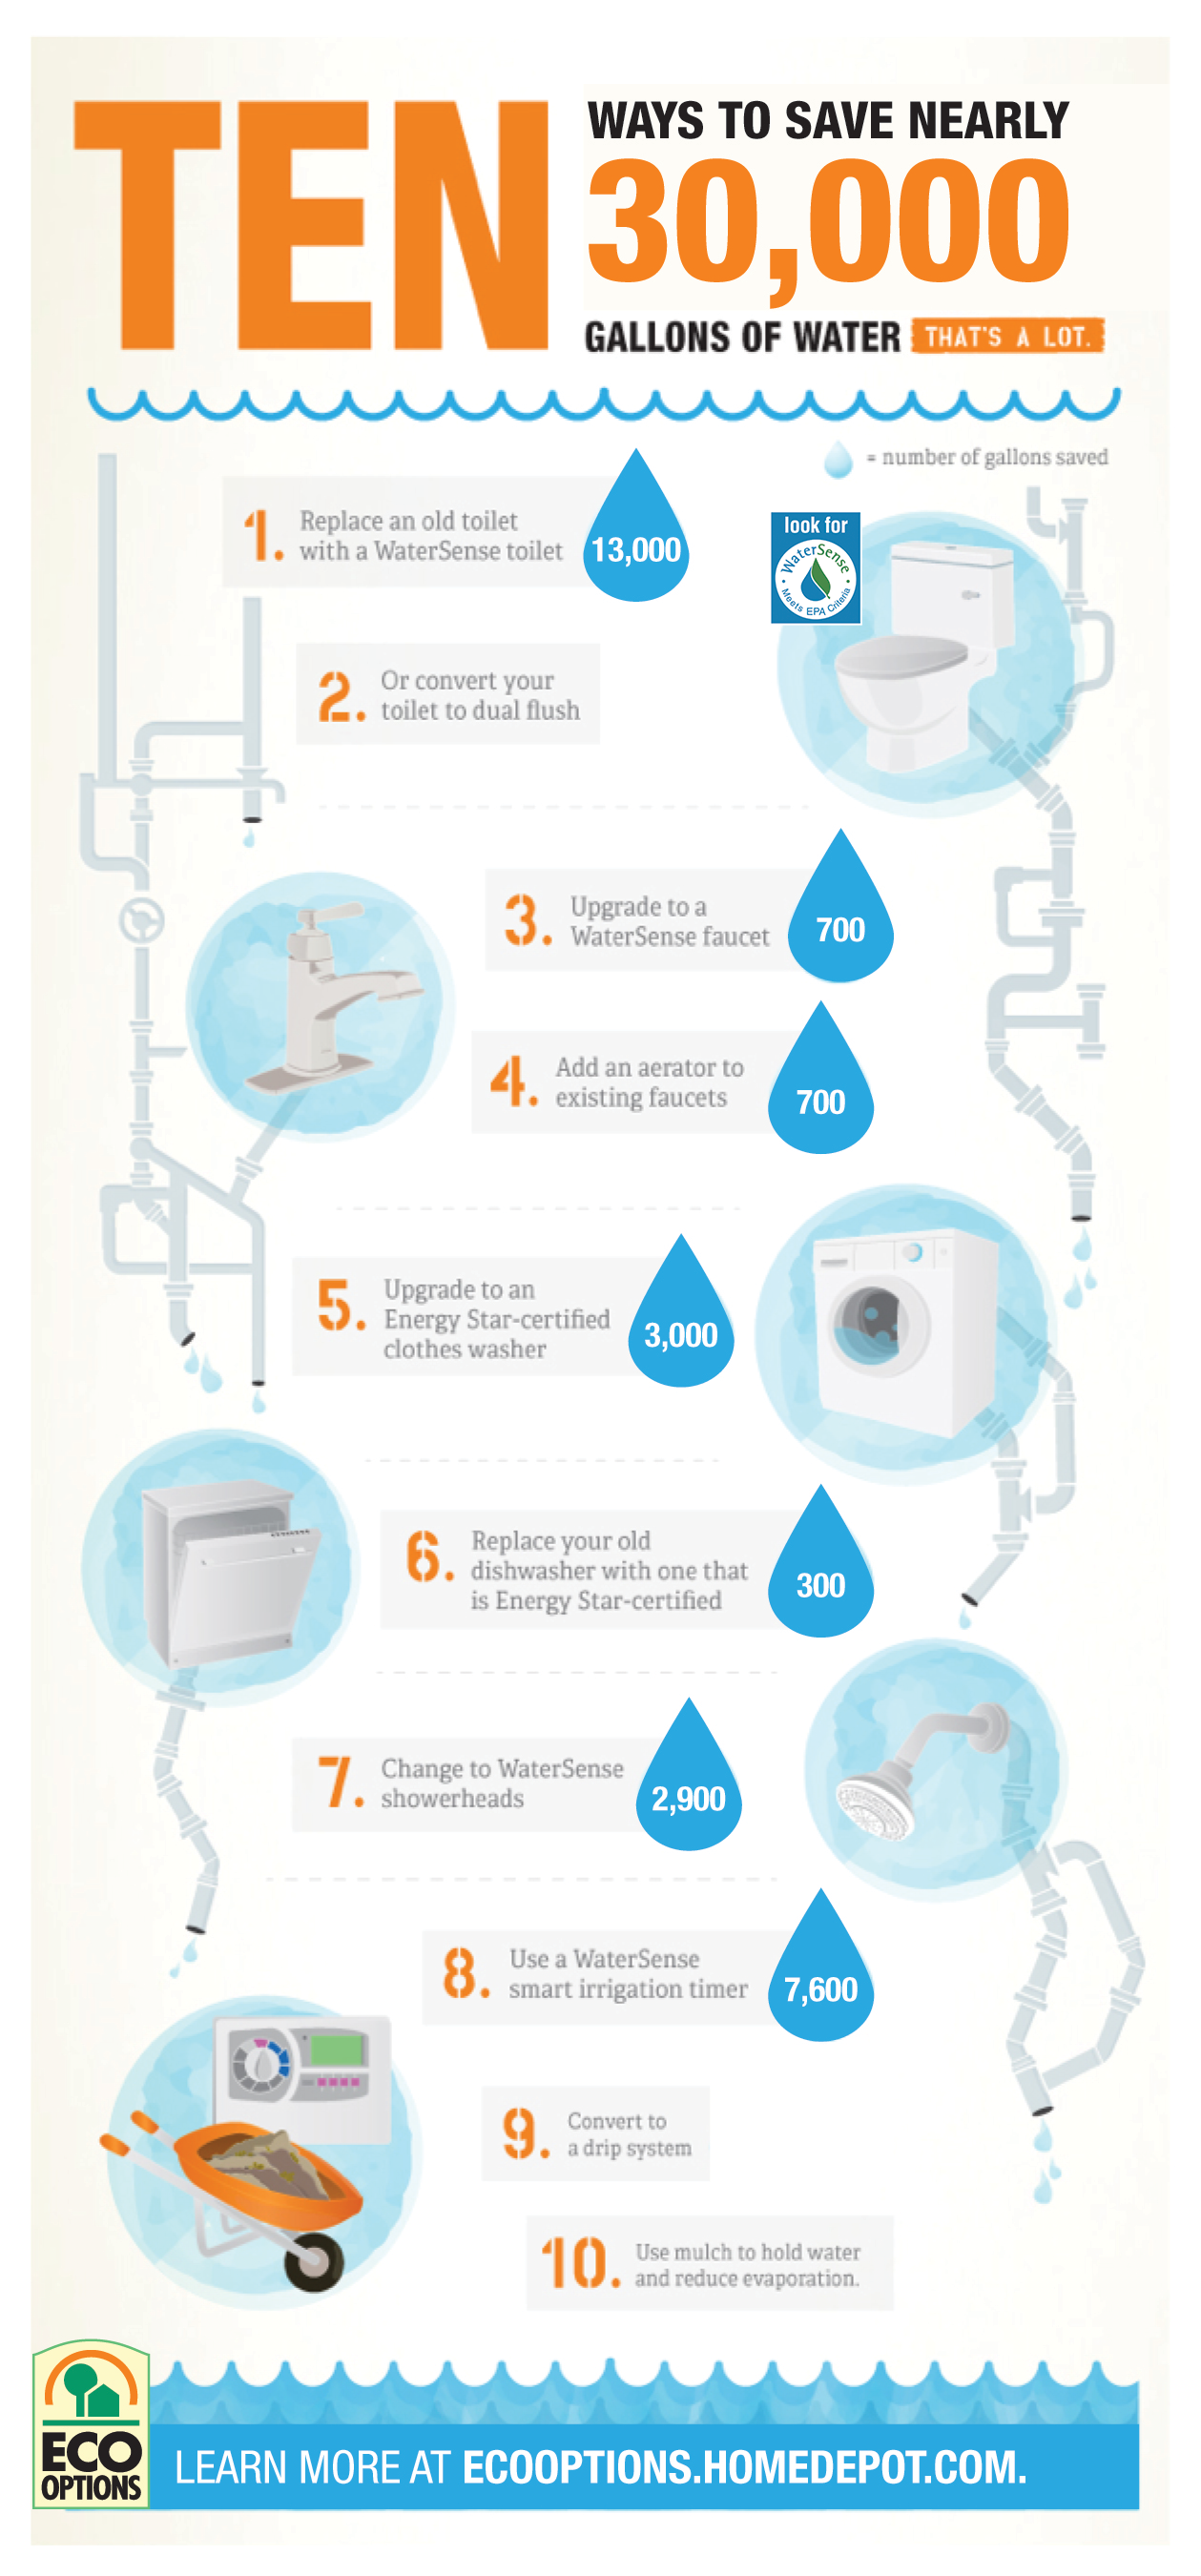 10 Ways to Save 30,000 gallons of water